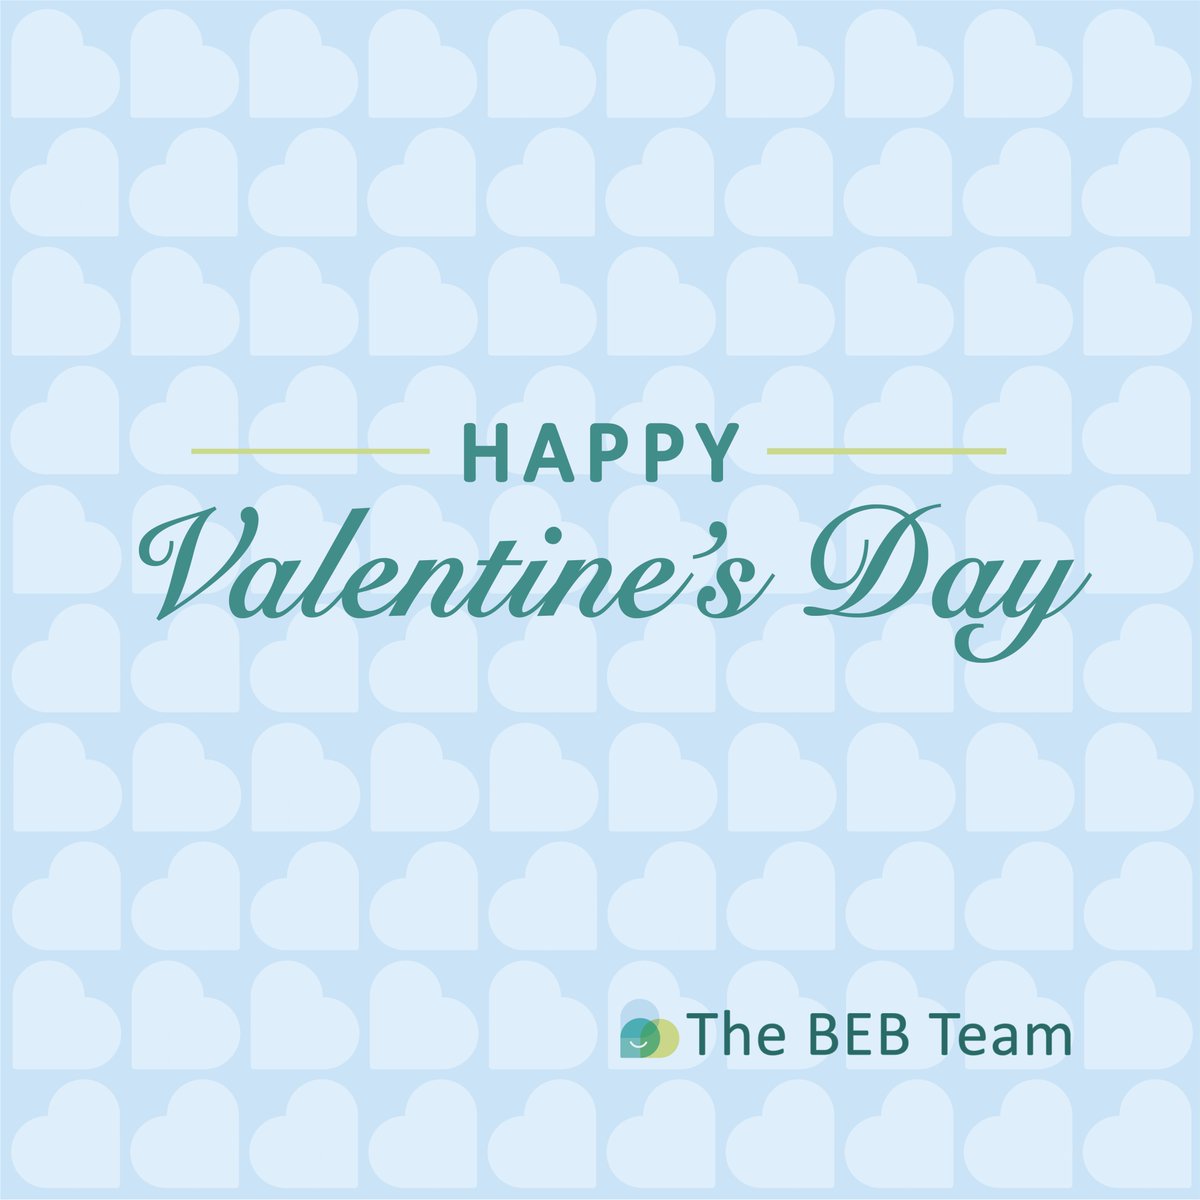 The BEB Team is wishing you a very Happy Valentine’s Day! Because of your love and support towards BEB, we are able to spread the love around the world to bring families together through reunification, adoption, and foster care. Thank you for your continued support!